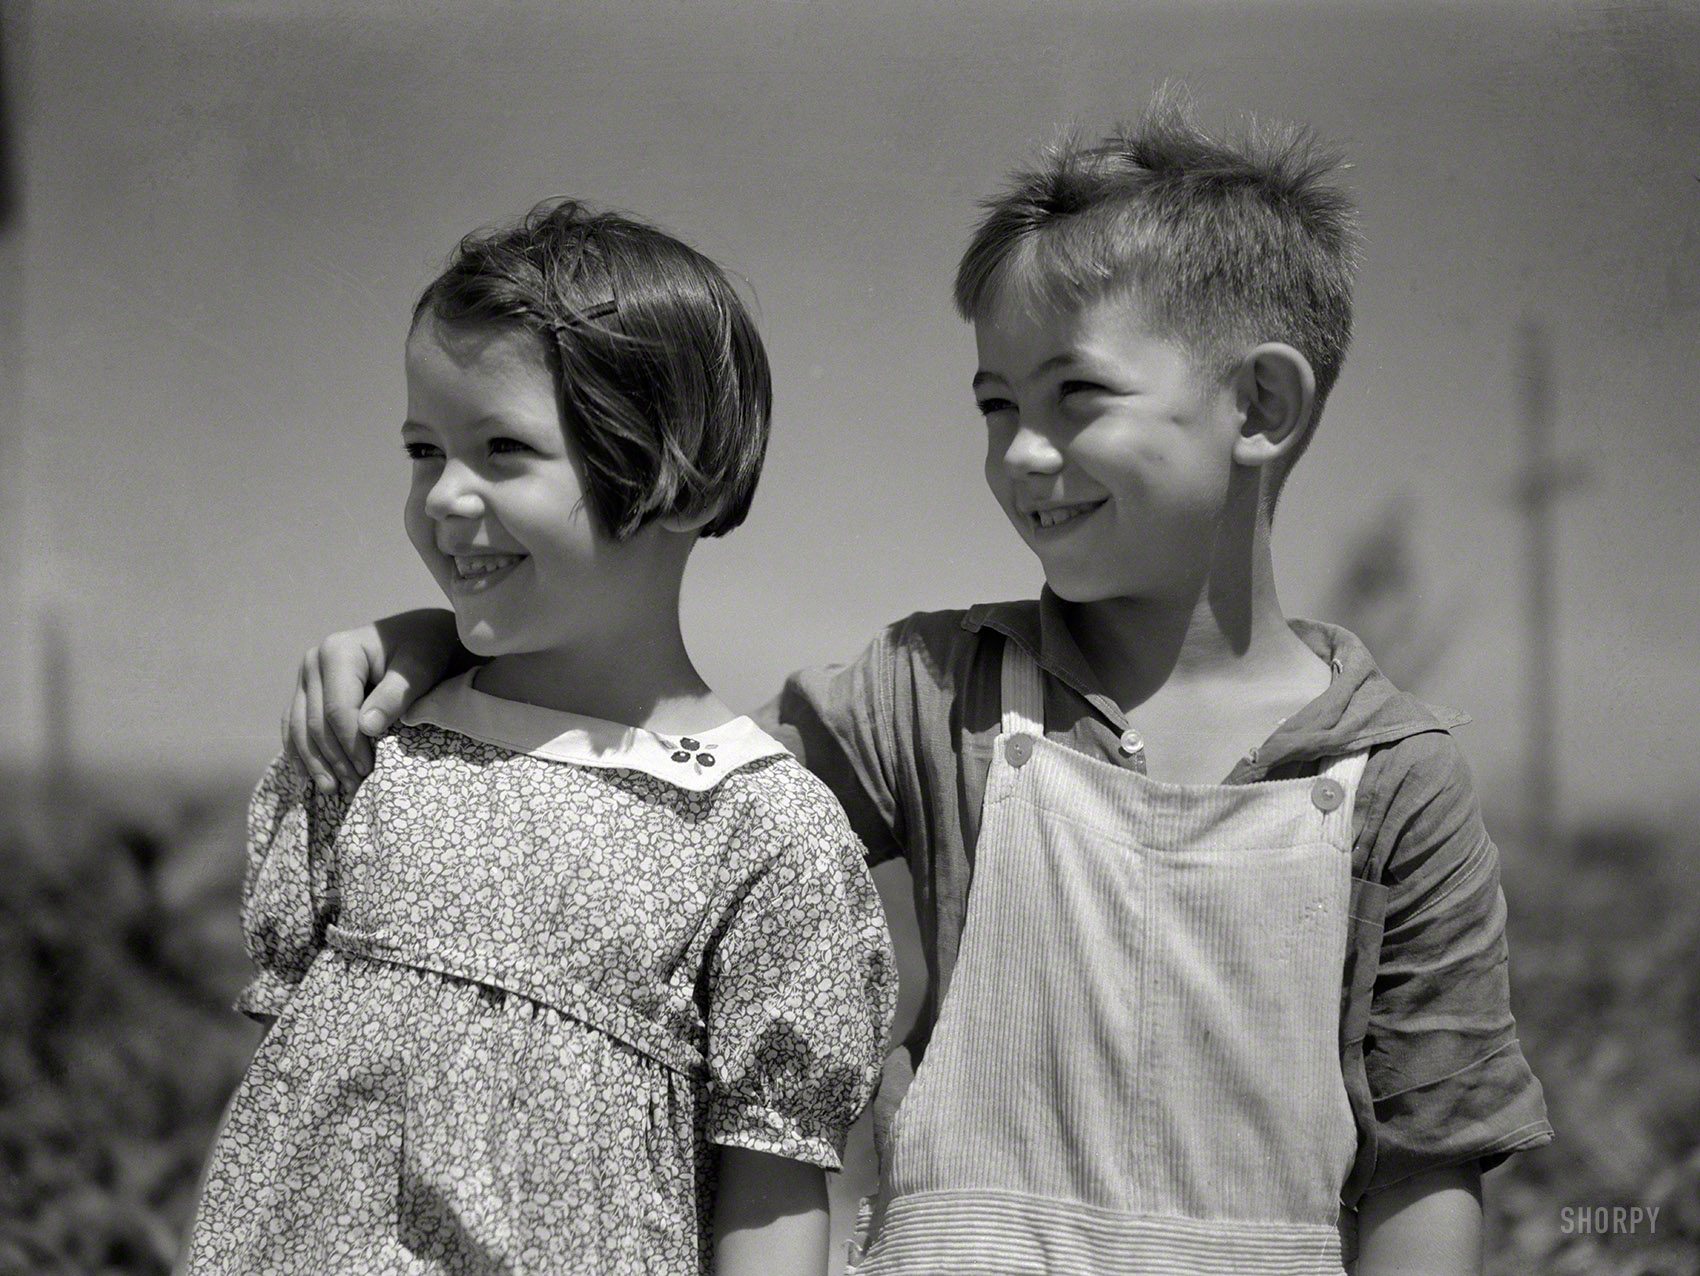 Summer 1936. "Children of homesteaders in Wichita Gardens, Texas, one of the subsistence colonies sponsored by the Farm Security Administration." Photo by Arthur Rothstein for the FSA. View full size.